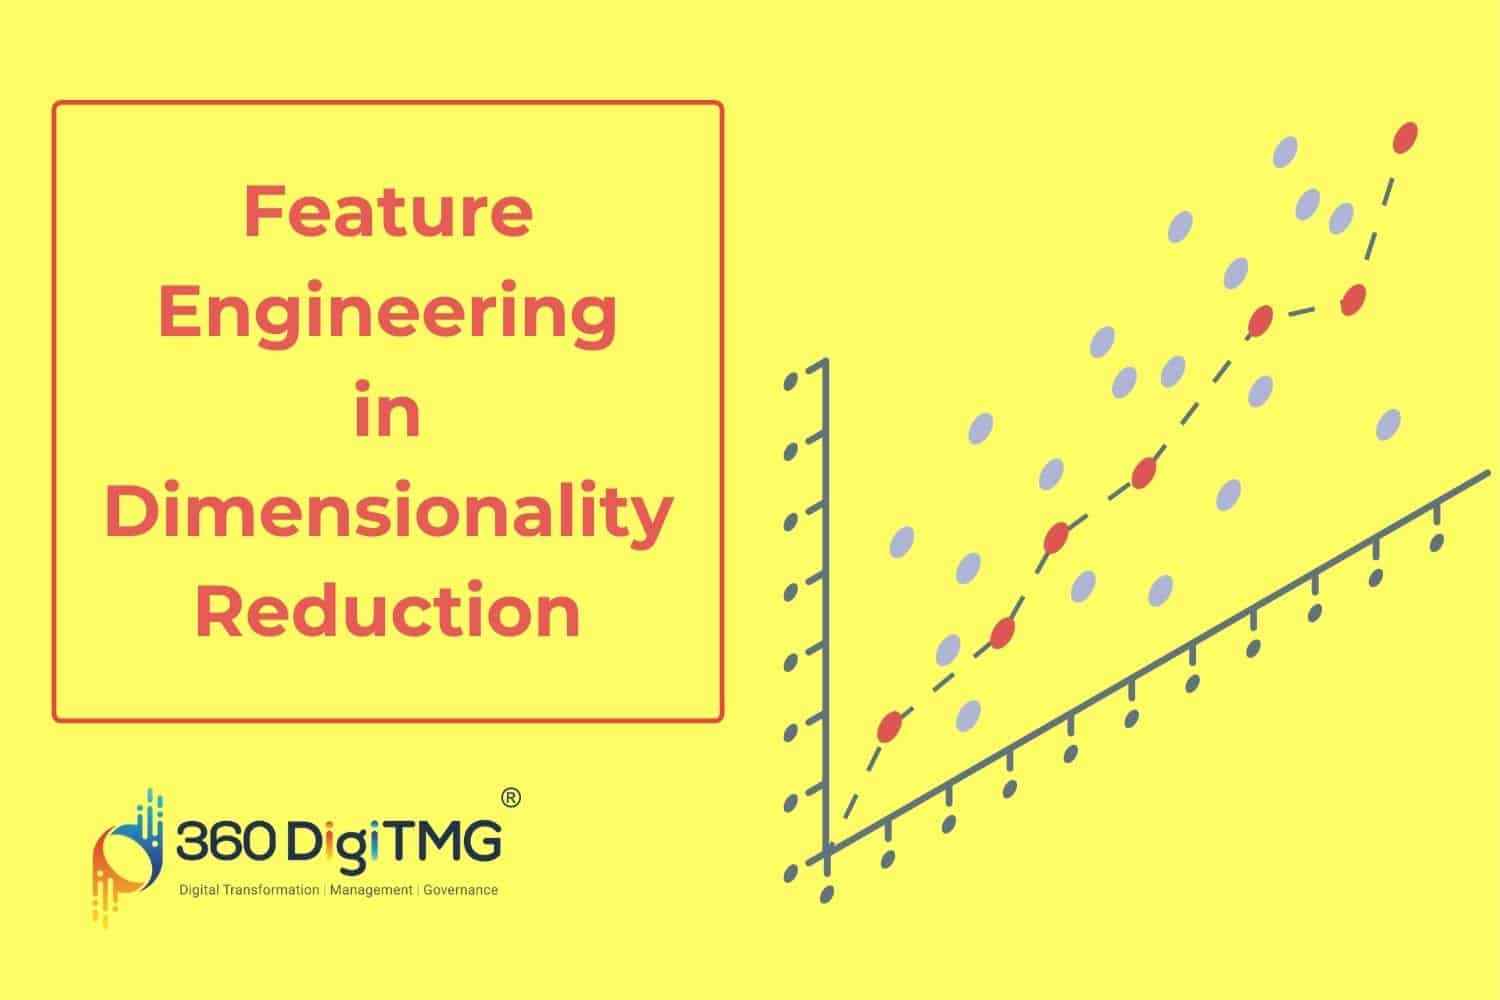 Feature Engineering in Dimensionality Reduction